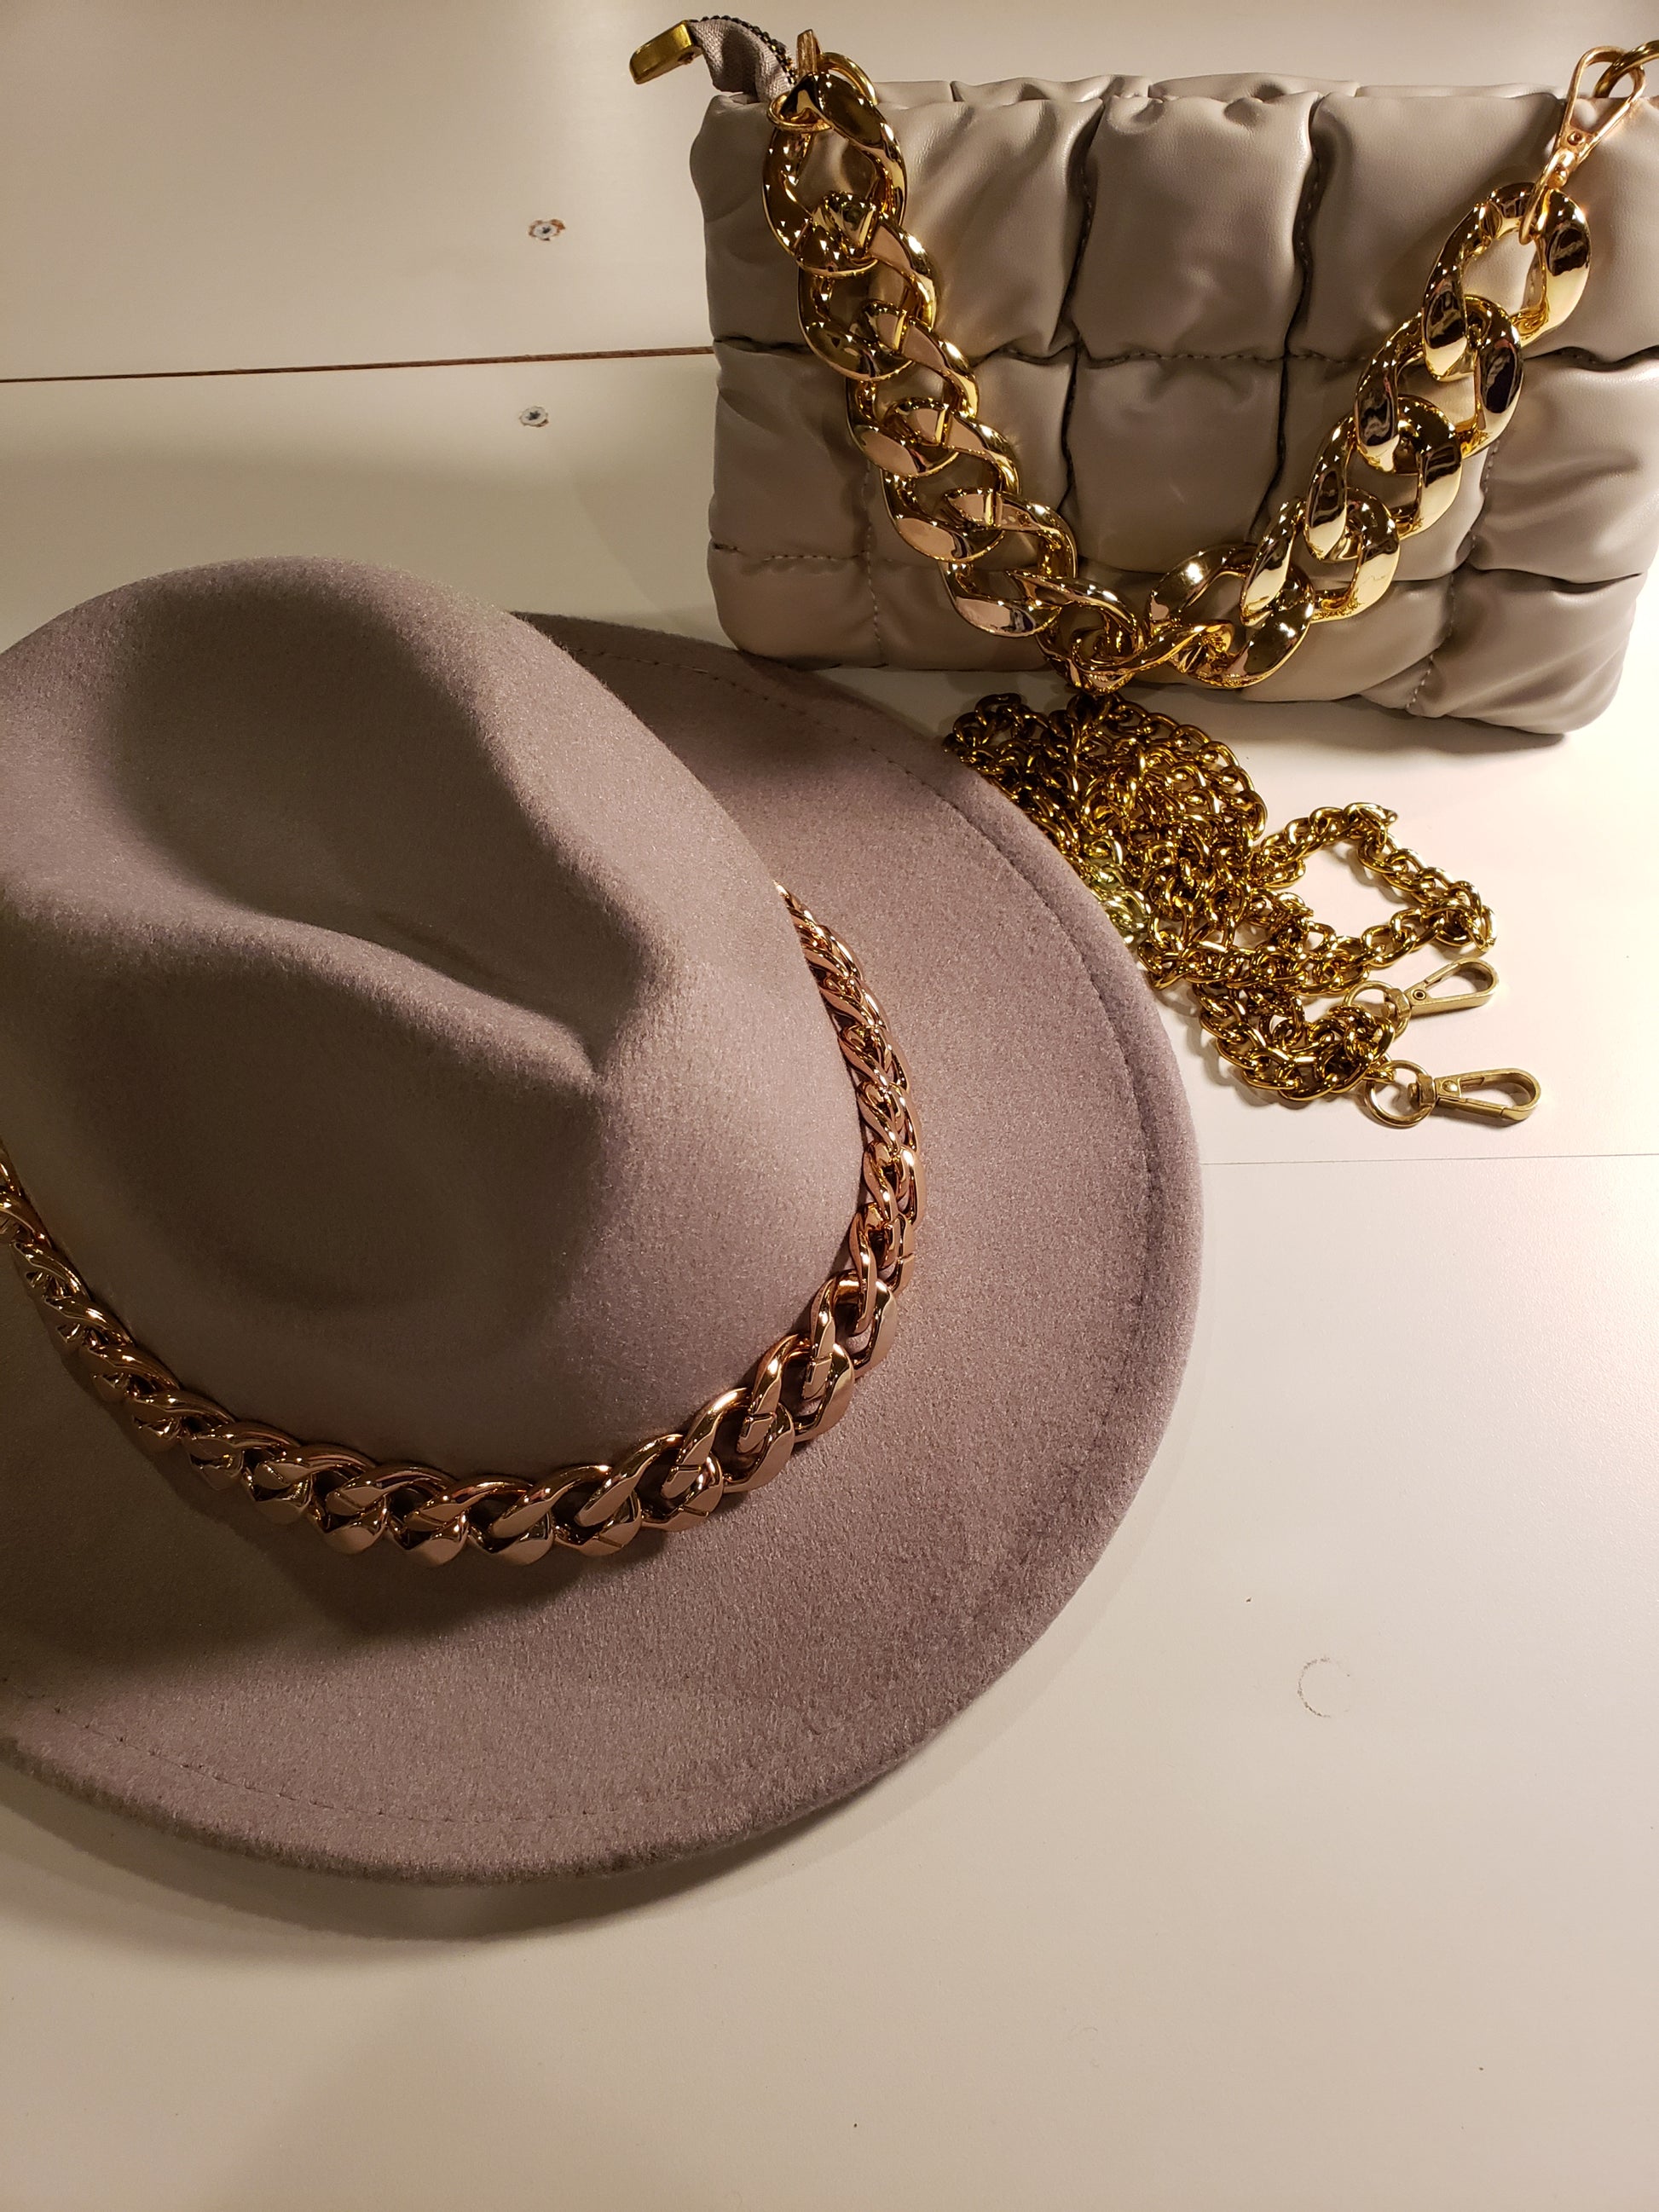 Women Casual Chain Design Solid Color Shoulder Handle Bag And Jazz Hat Set.  1 Full pocket on inside.  Colors may look slightly different due to picture.